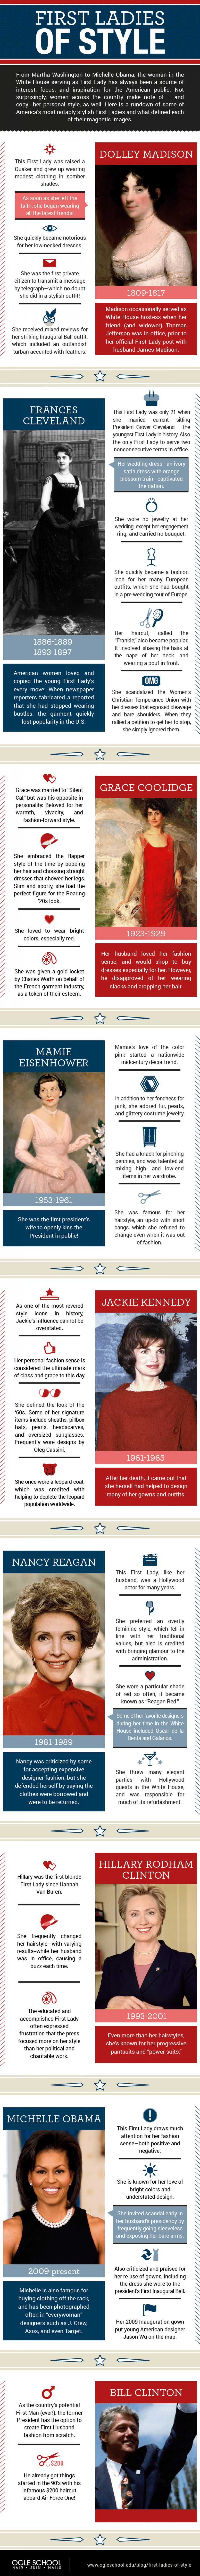 Infographic of The Most Stylish U.S. First Ladies